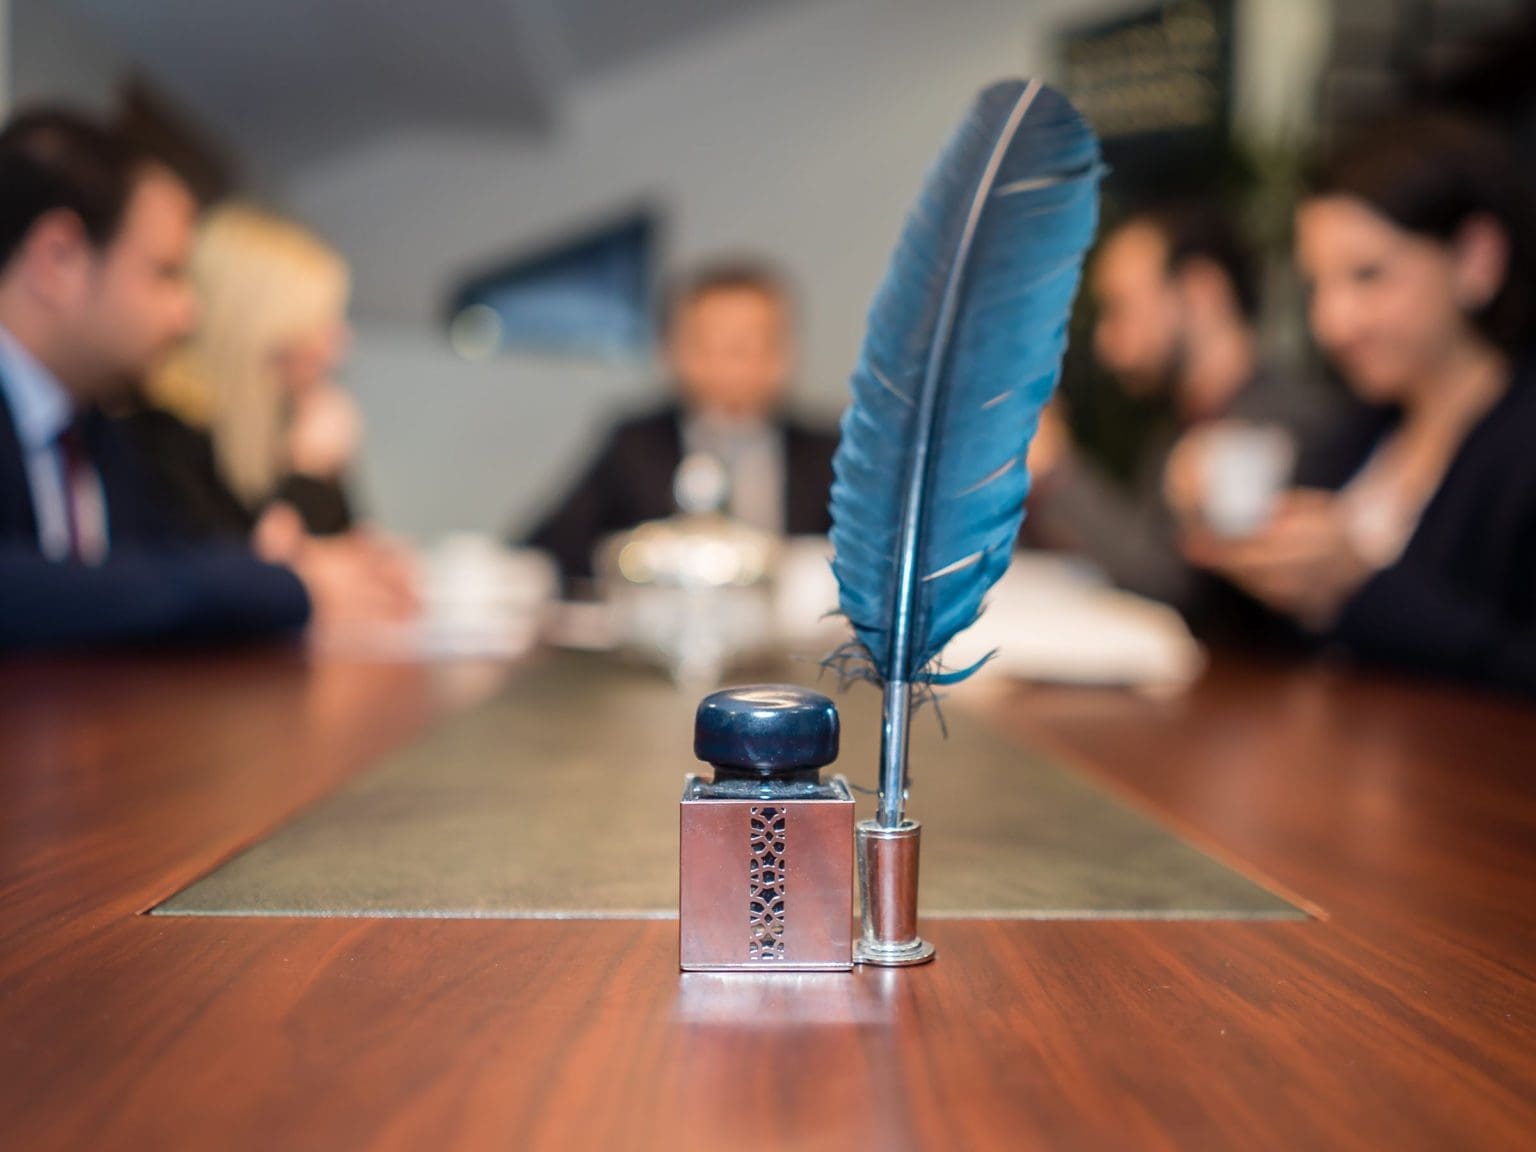 Meeting in a room with a feather in front.